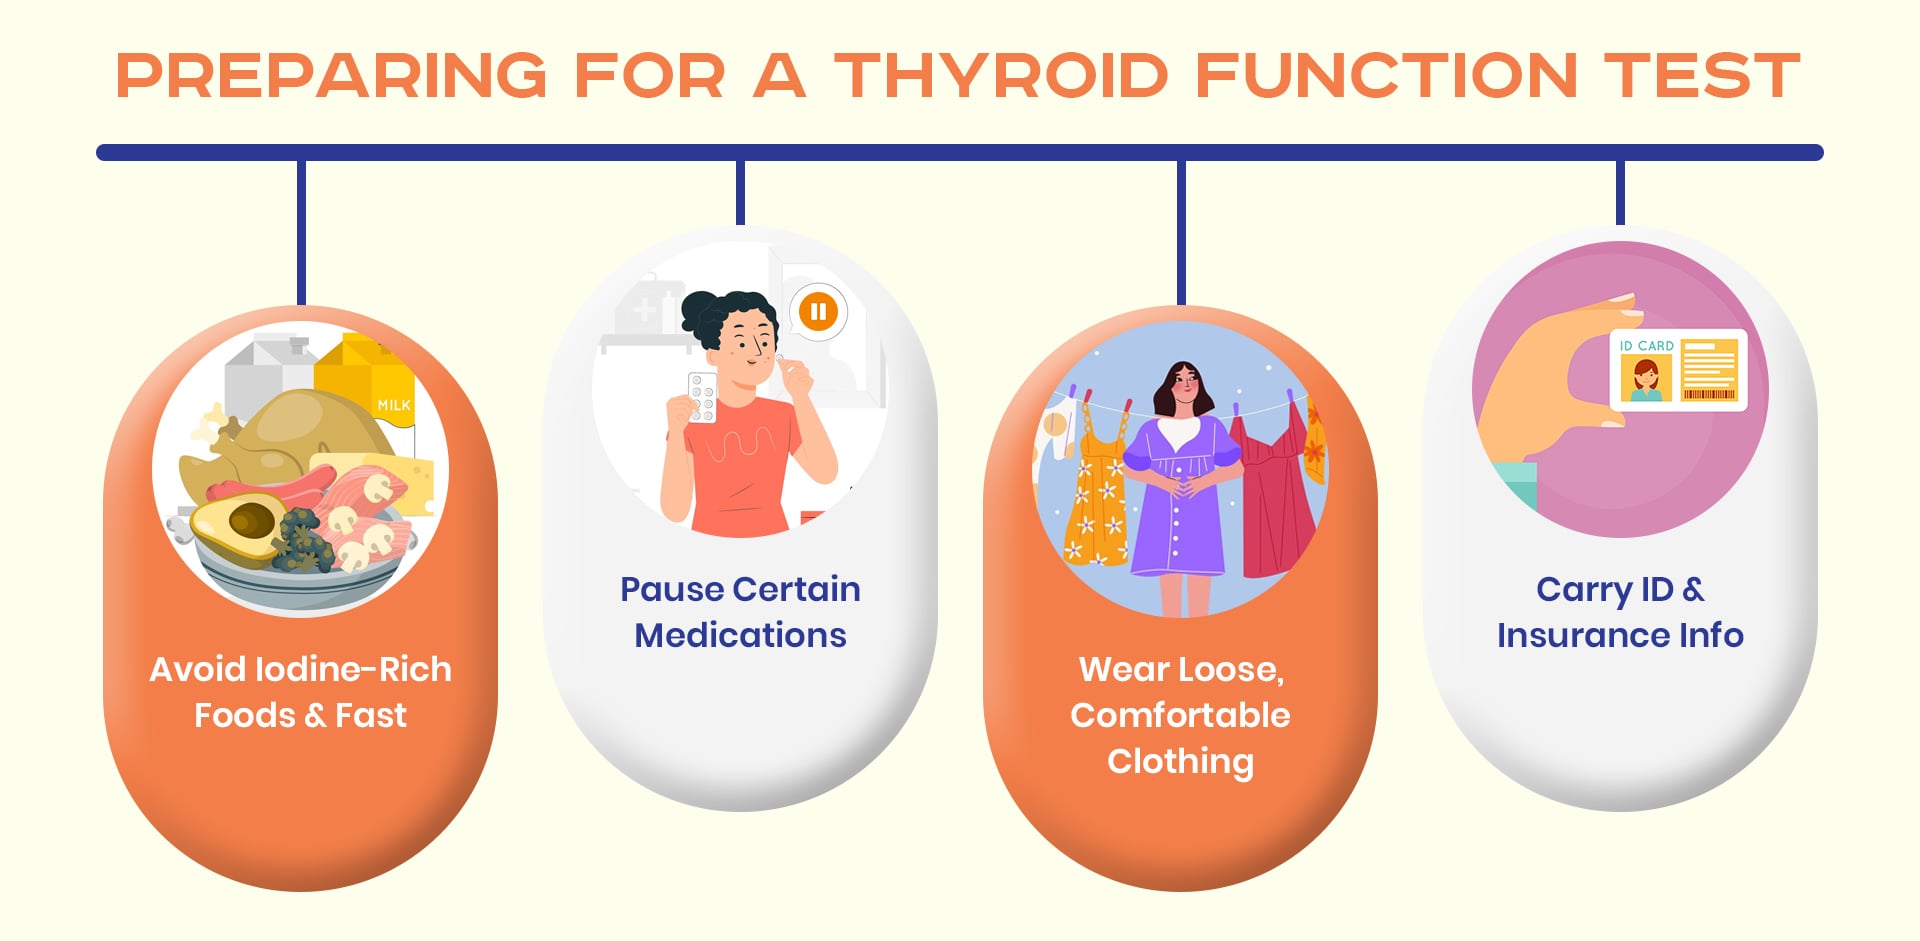 How to Prepare for a Thyroid Function Test